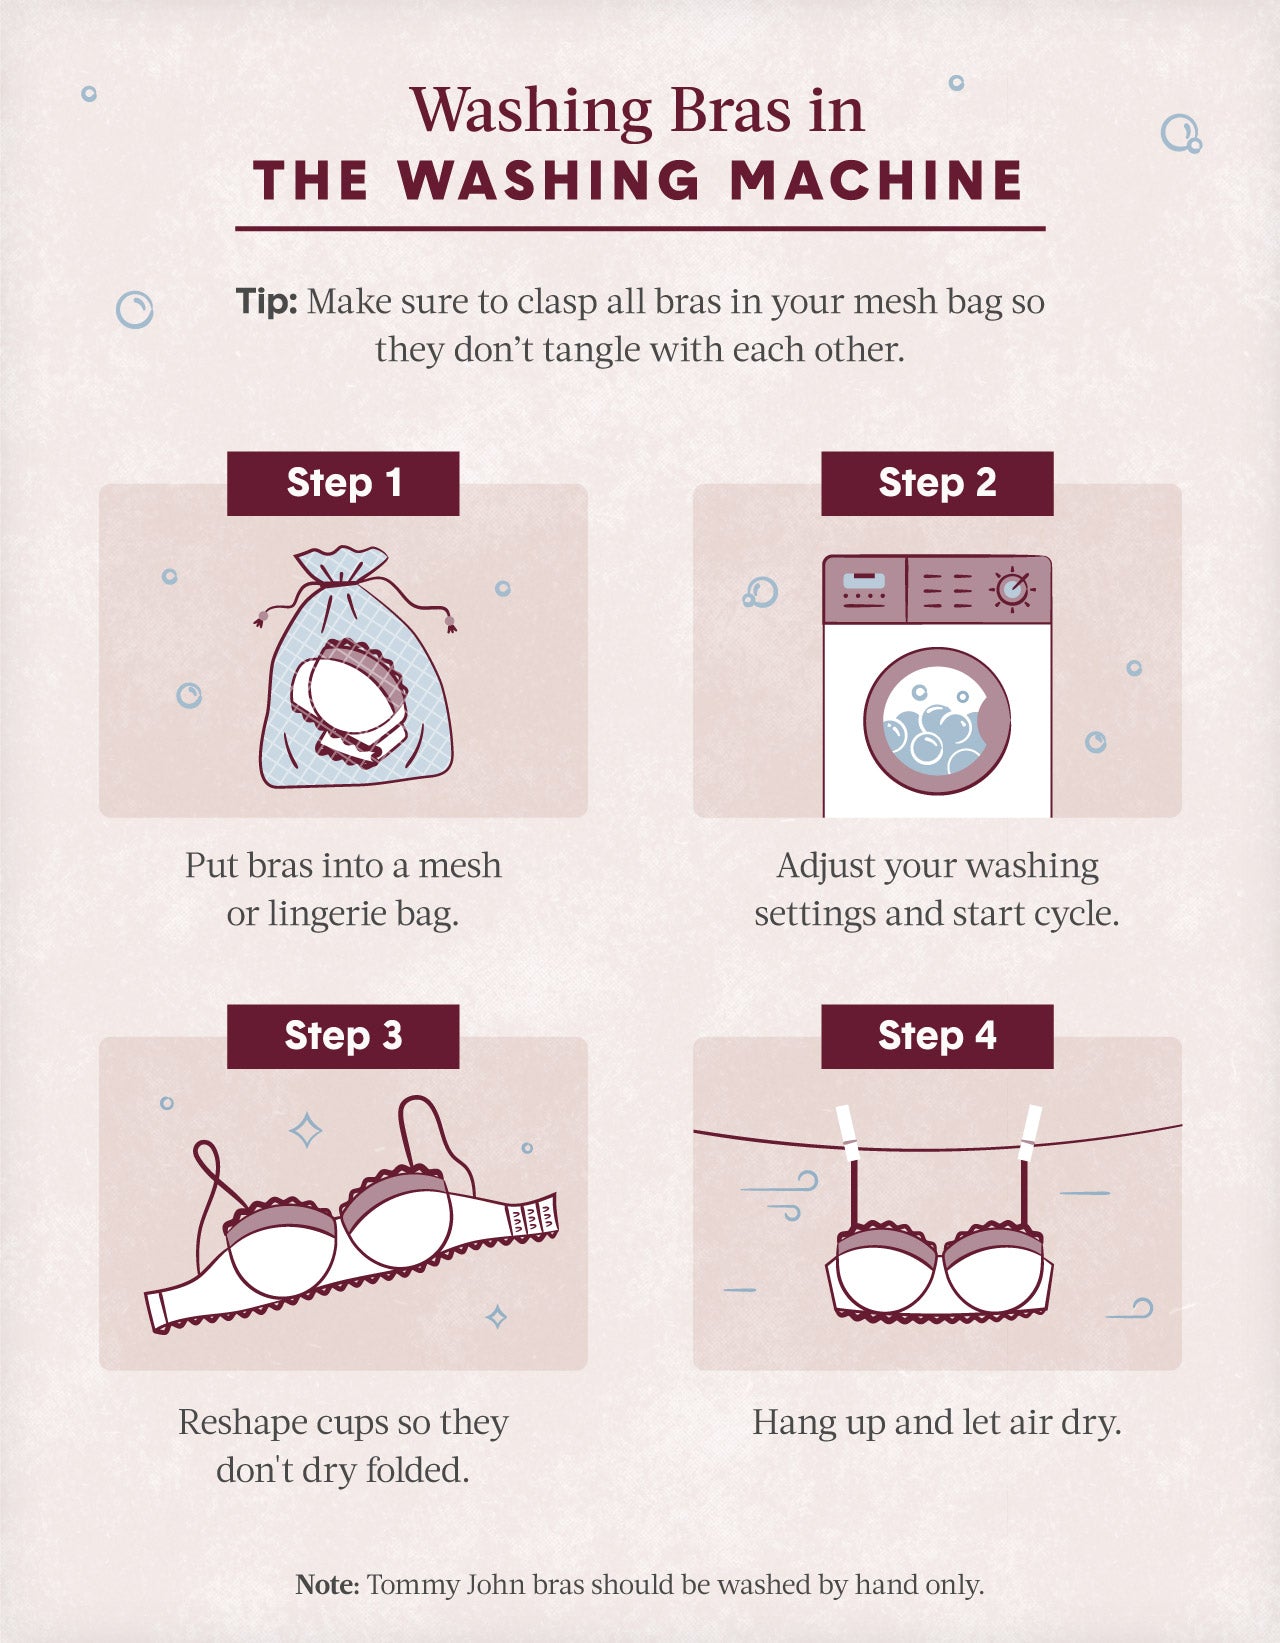 Tips For Washing Bras: Best Practices & How To Do It In The Real World